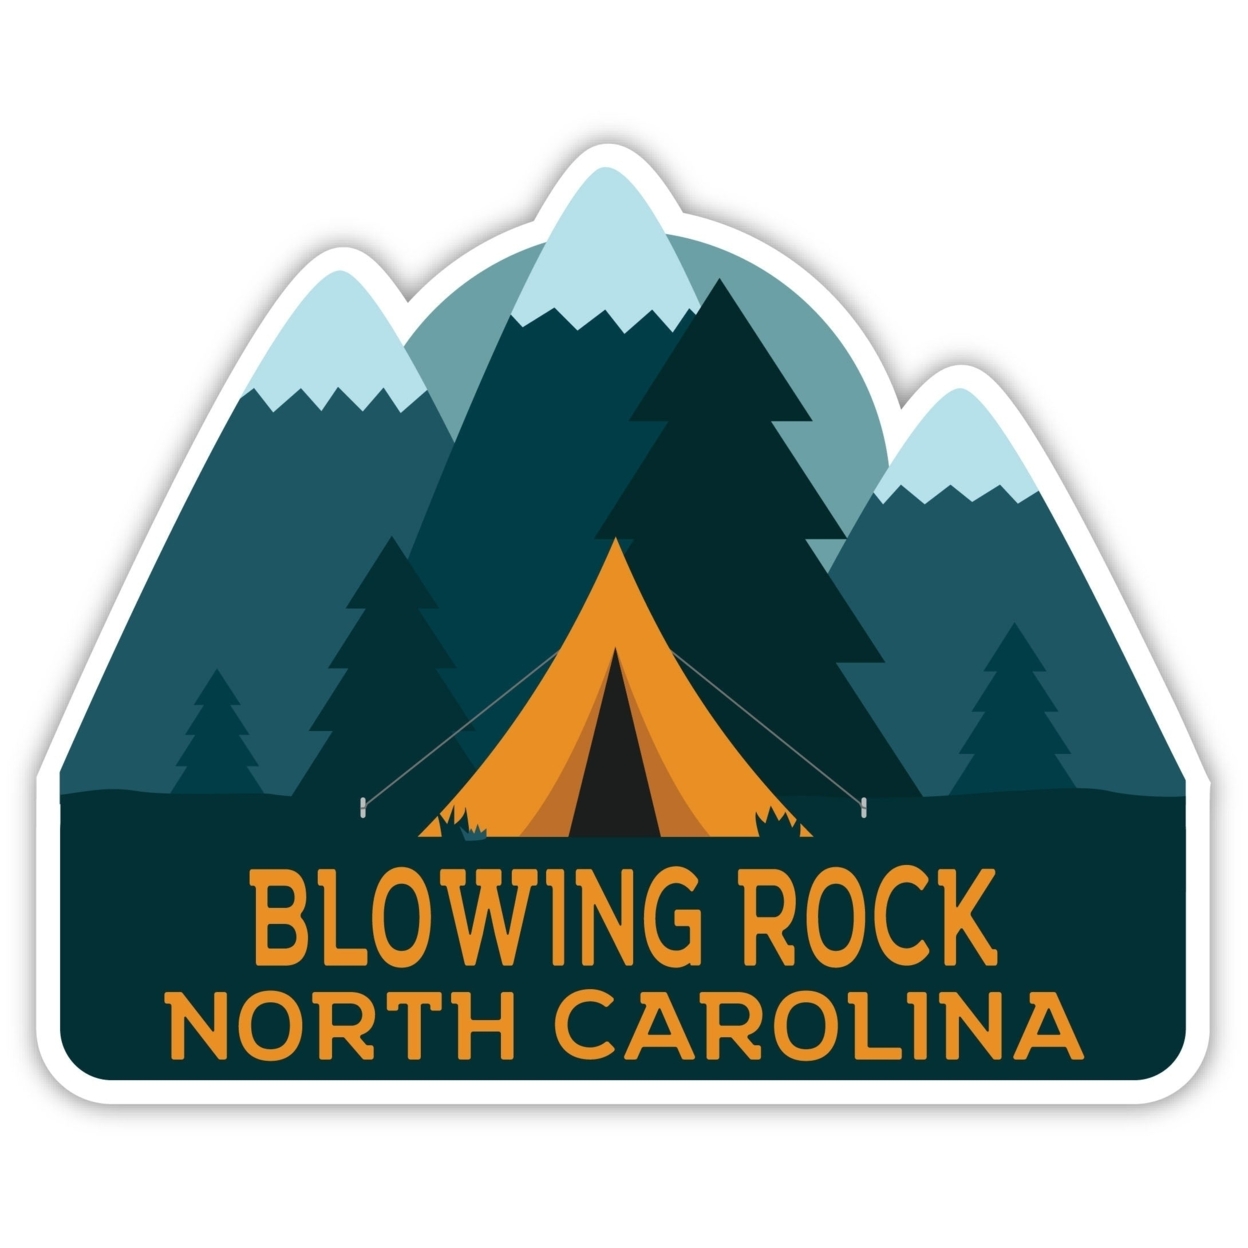 Blowing Rock North Carolina Souvenir Decorative Stickers (Choose Theme And Size) - 4-Pack, 10-Inch, Tent